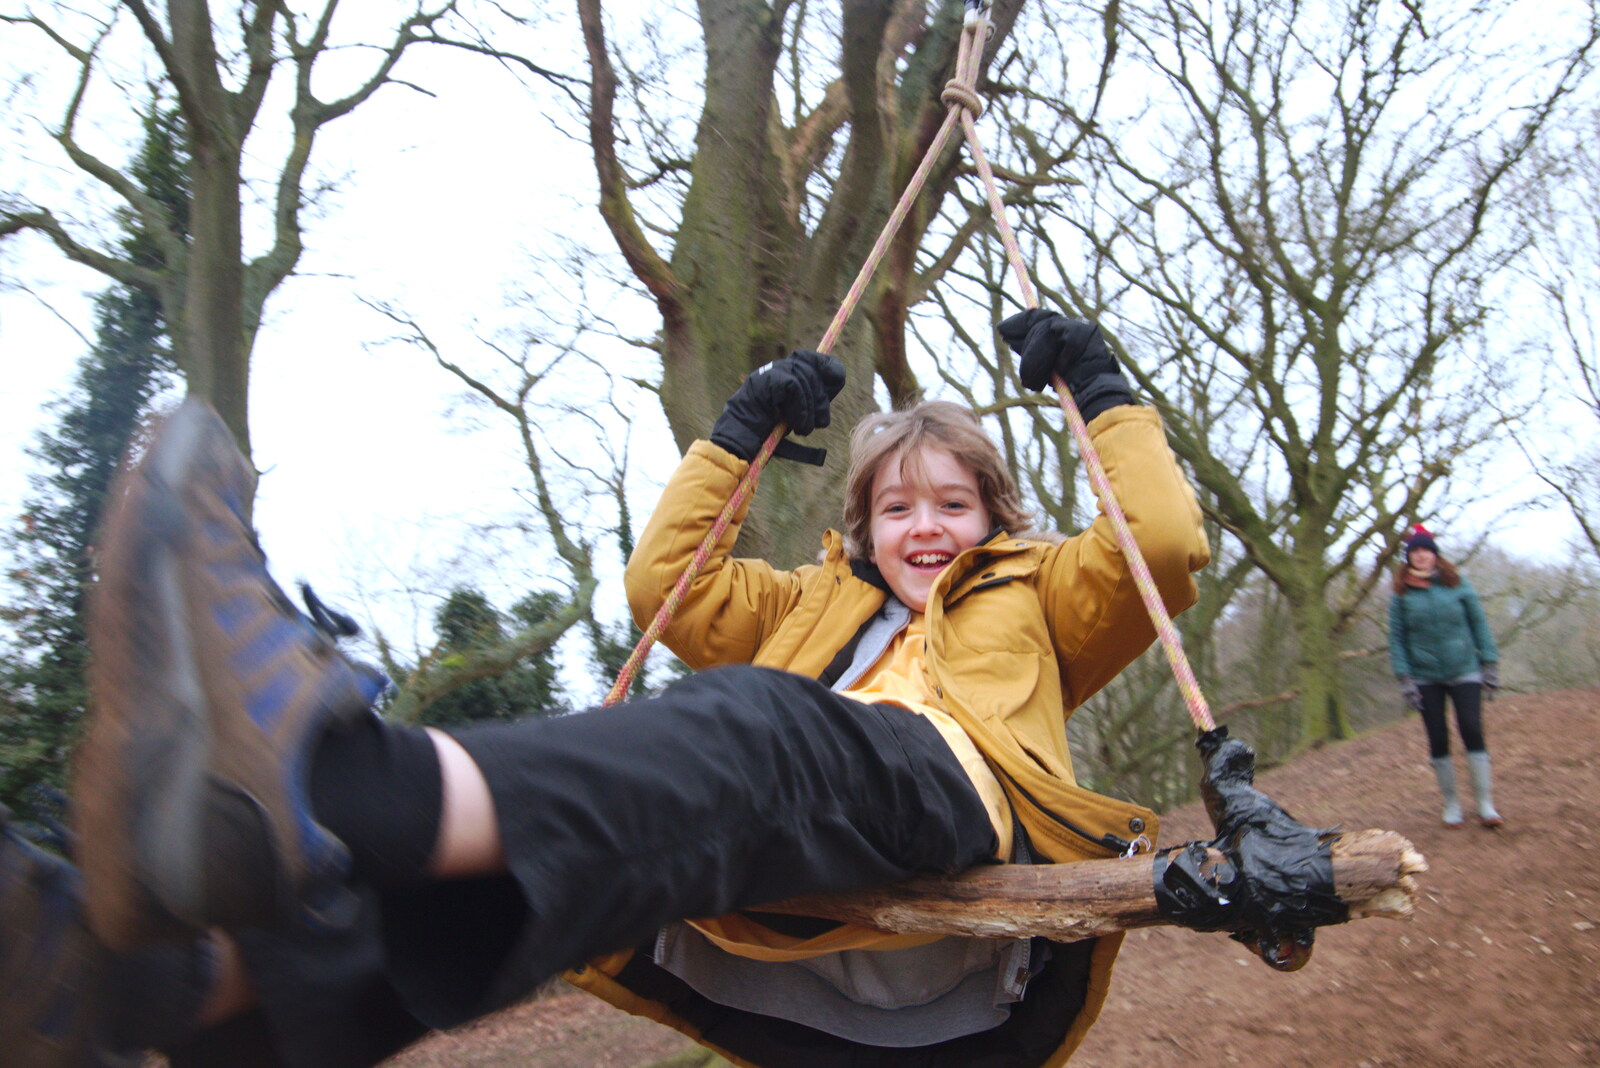 Fred on a rope swing, close up from New Year's Day on the Ling, Wortham, Suffolk - 1st January 2020